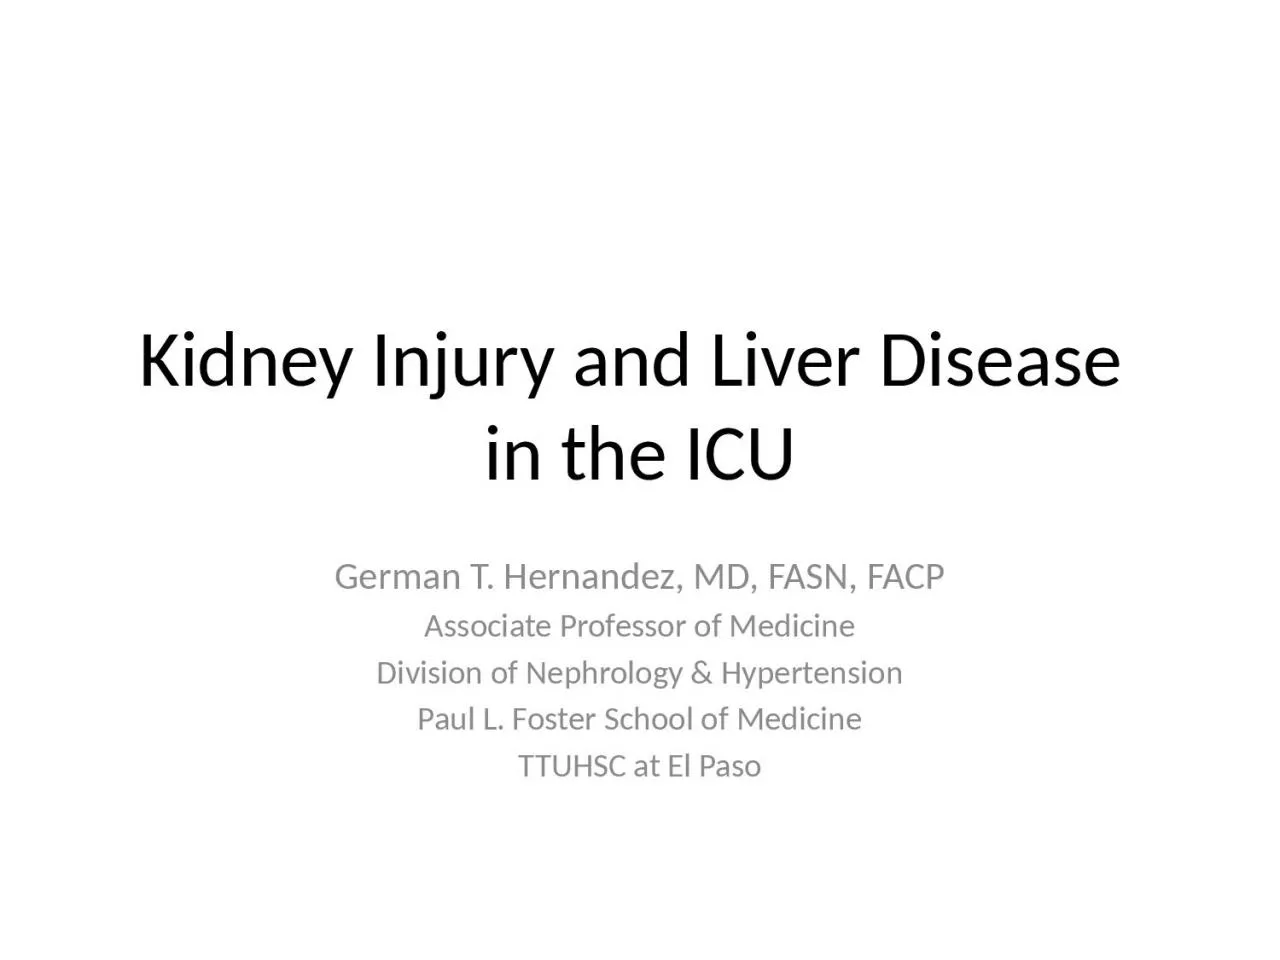 Kidney Injury and Liver Disease